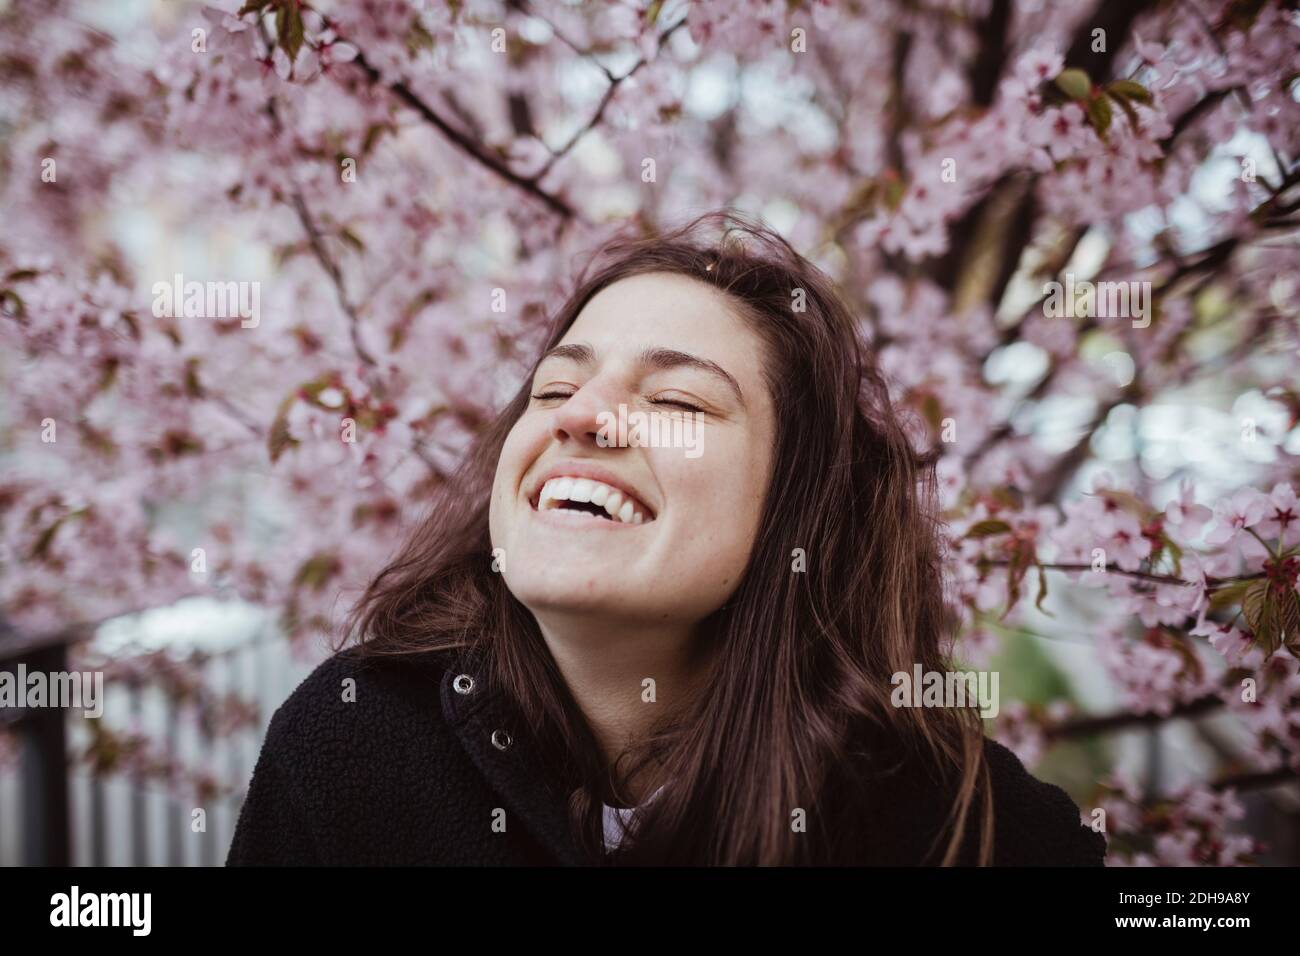 Happy woman with eyes closed standing against tree Stock Photo